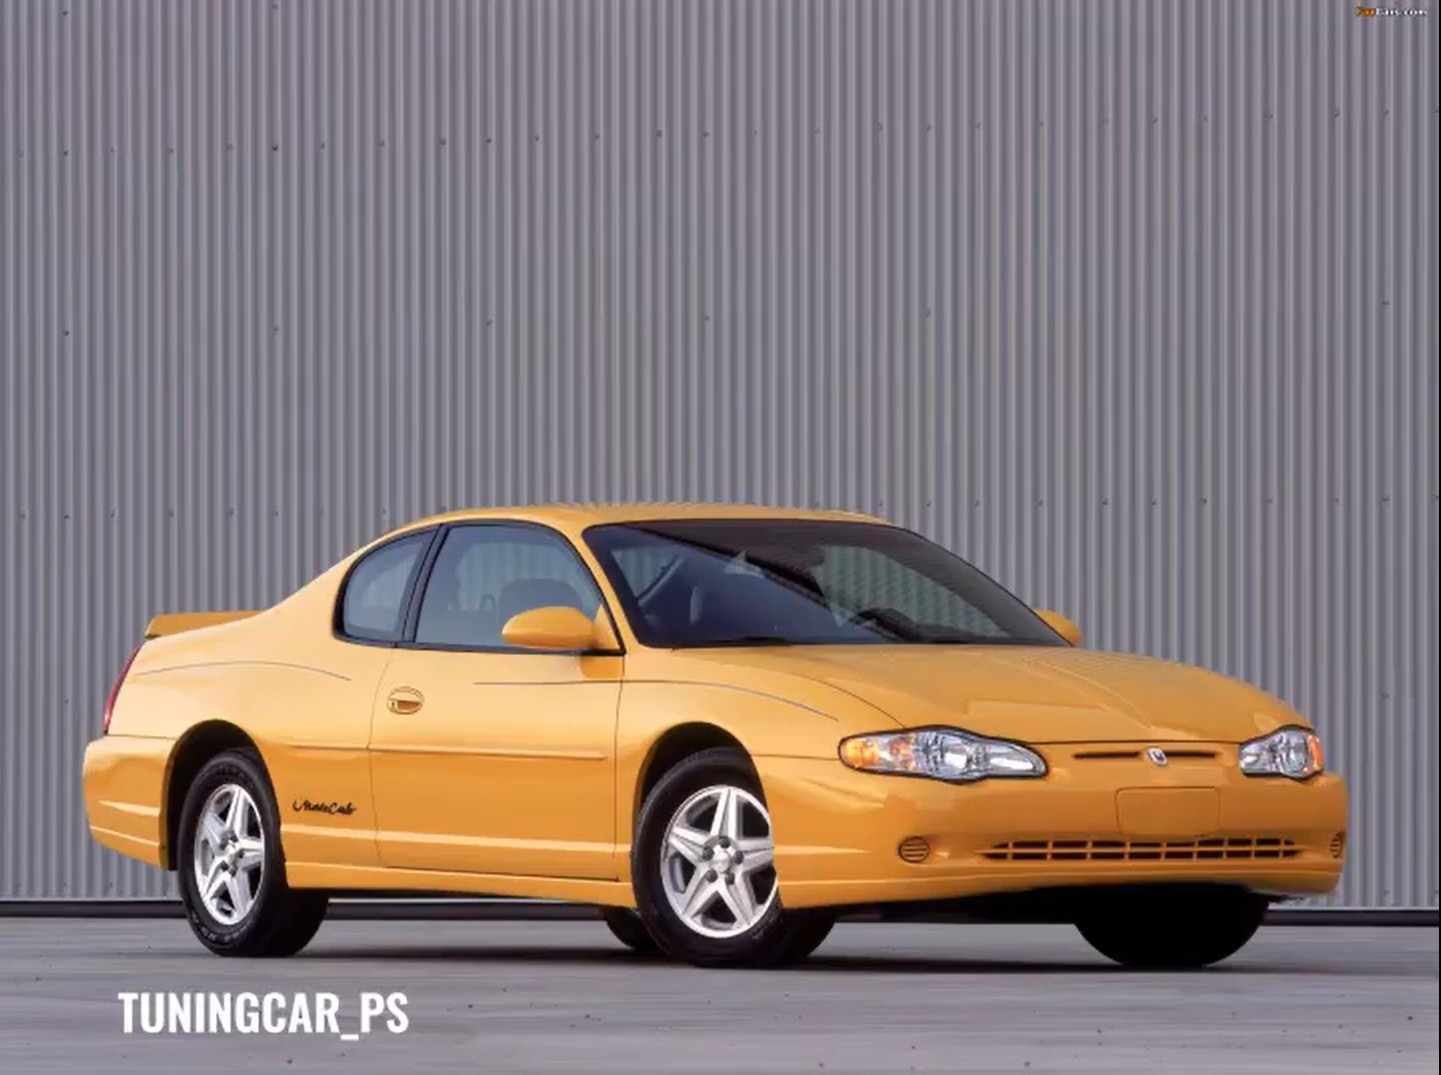 2024 Chevy Monte Carlo Revival Is Actually a FanRequested 2000s CGI